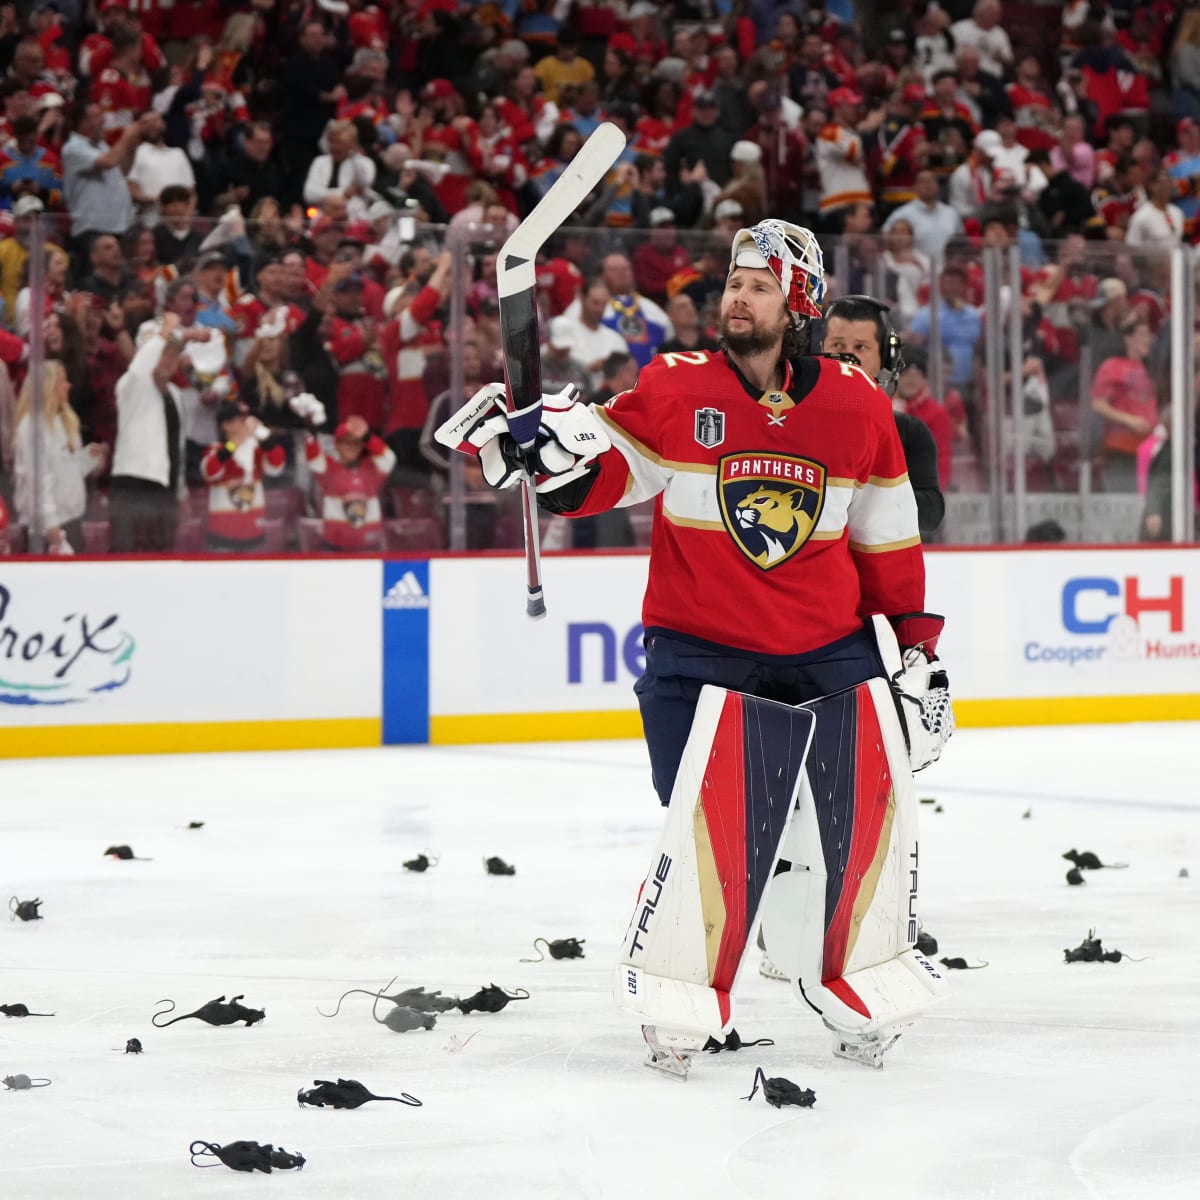 Stanley Cup Final: Fans roast NHL over Panthers' awkward patch placement